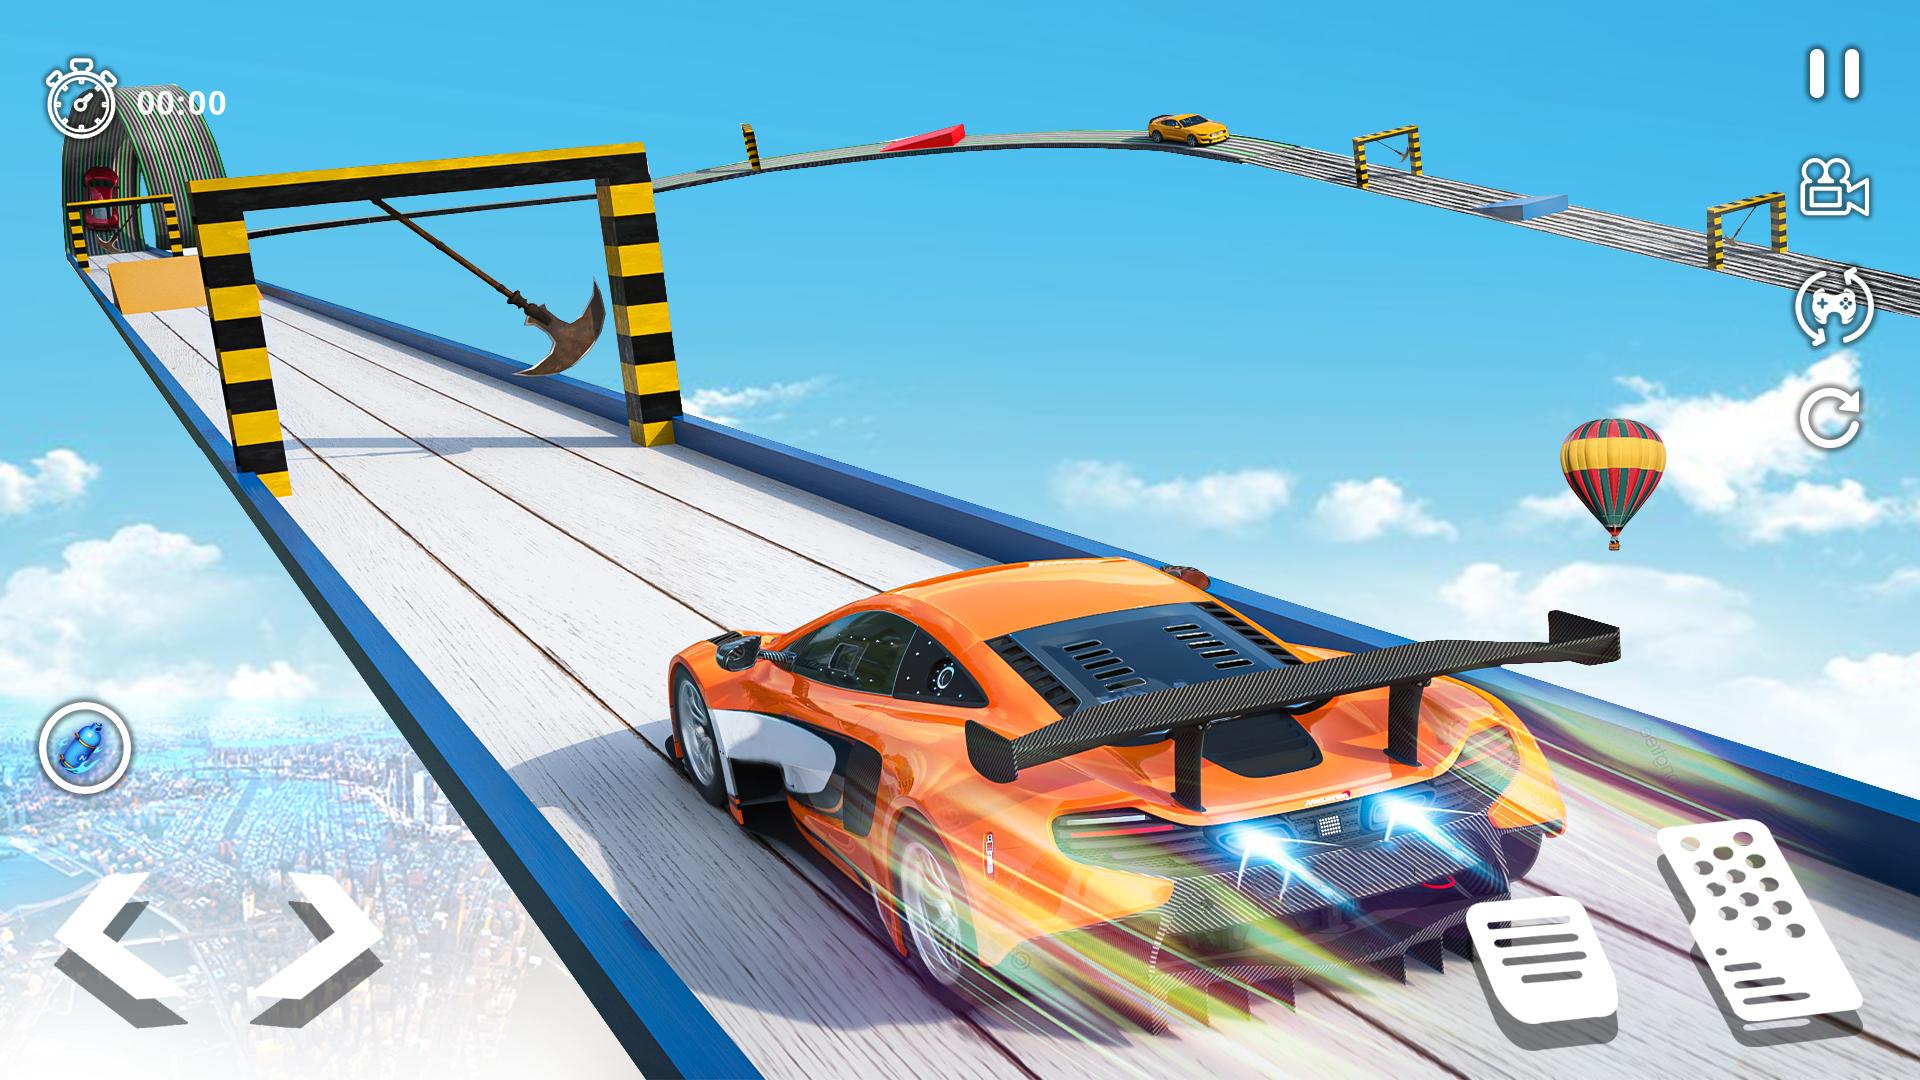 Download and play Crazy Car Stunt: Car Games on PC & Mac